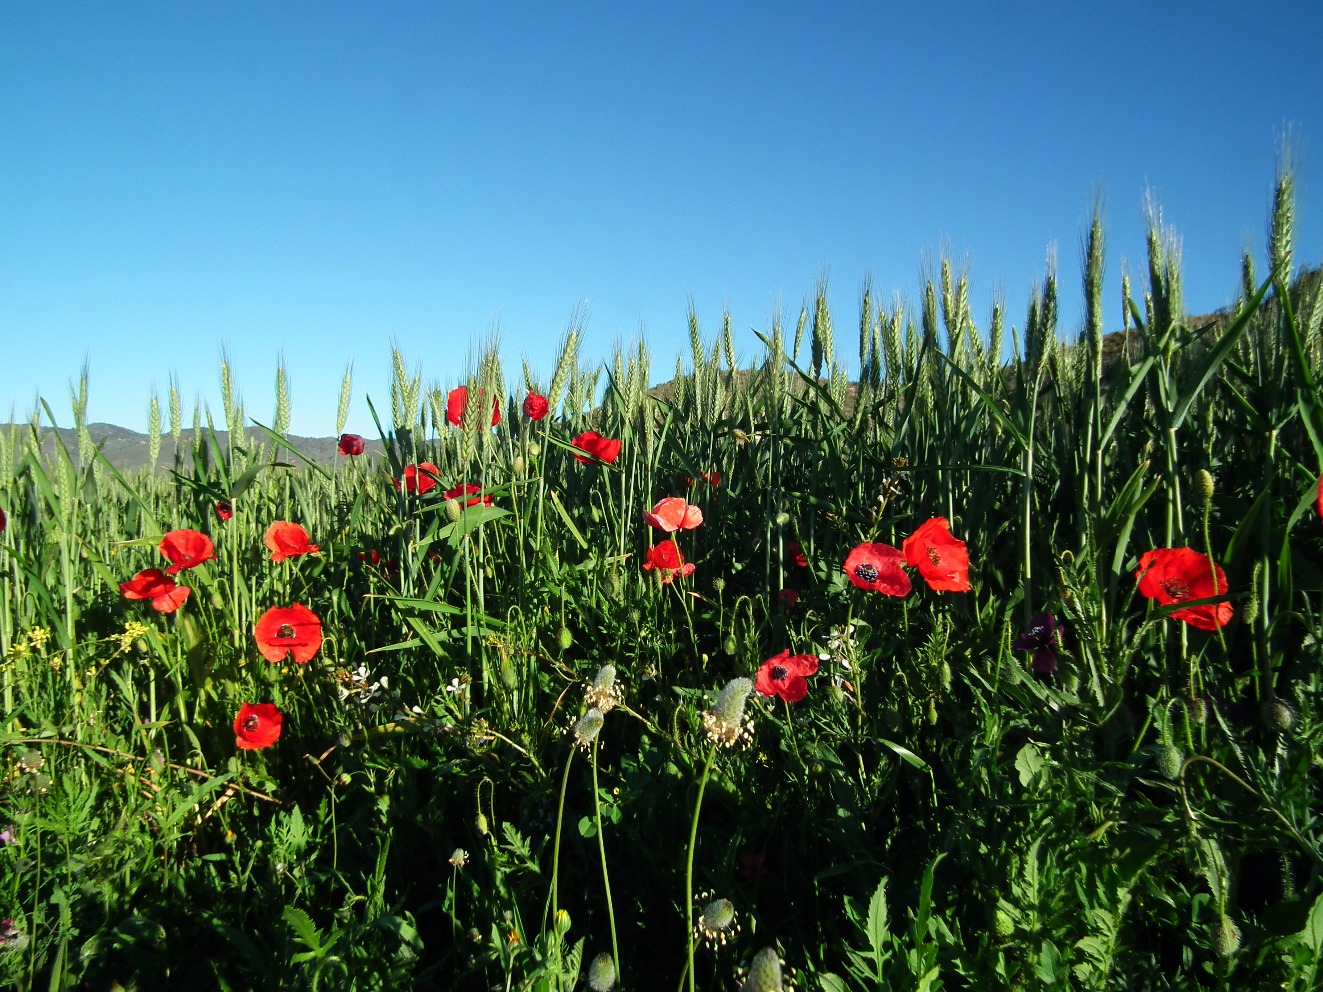 Poppies with Wheat, Flower | Poppy | Red | Seed | Wheat | Field | Blue | Sky | Green